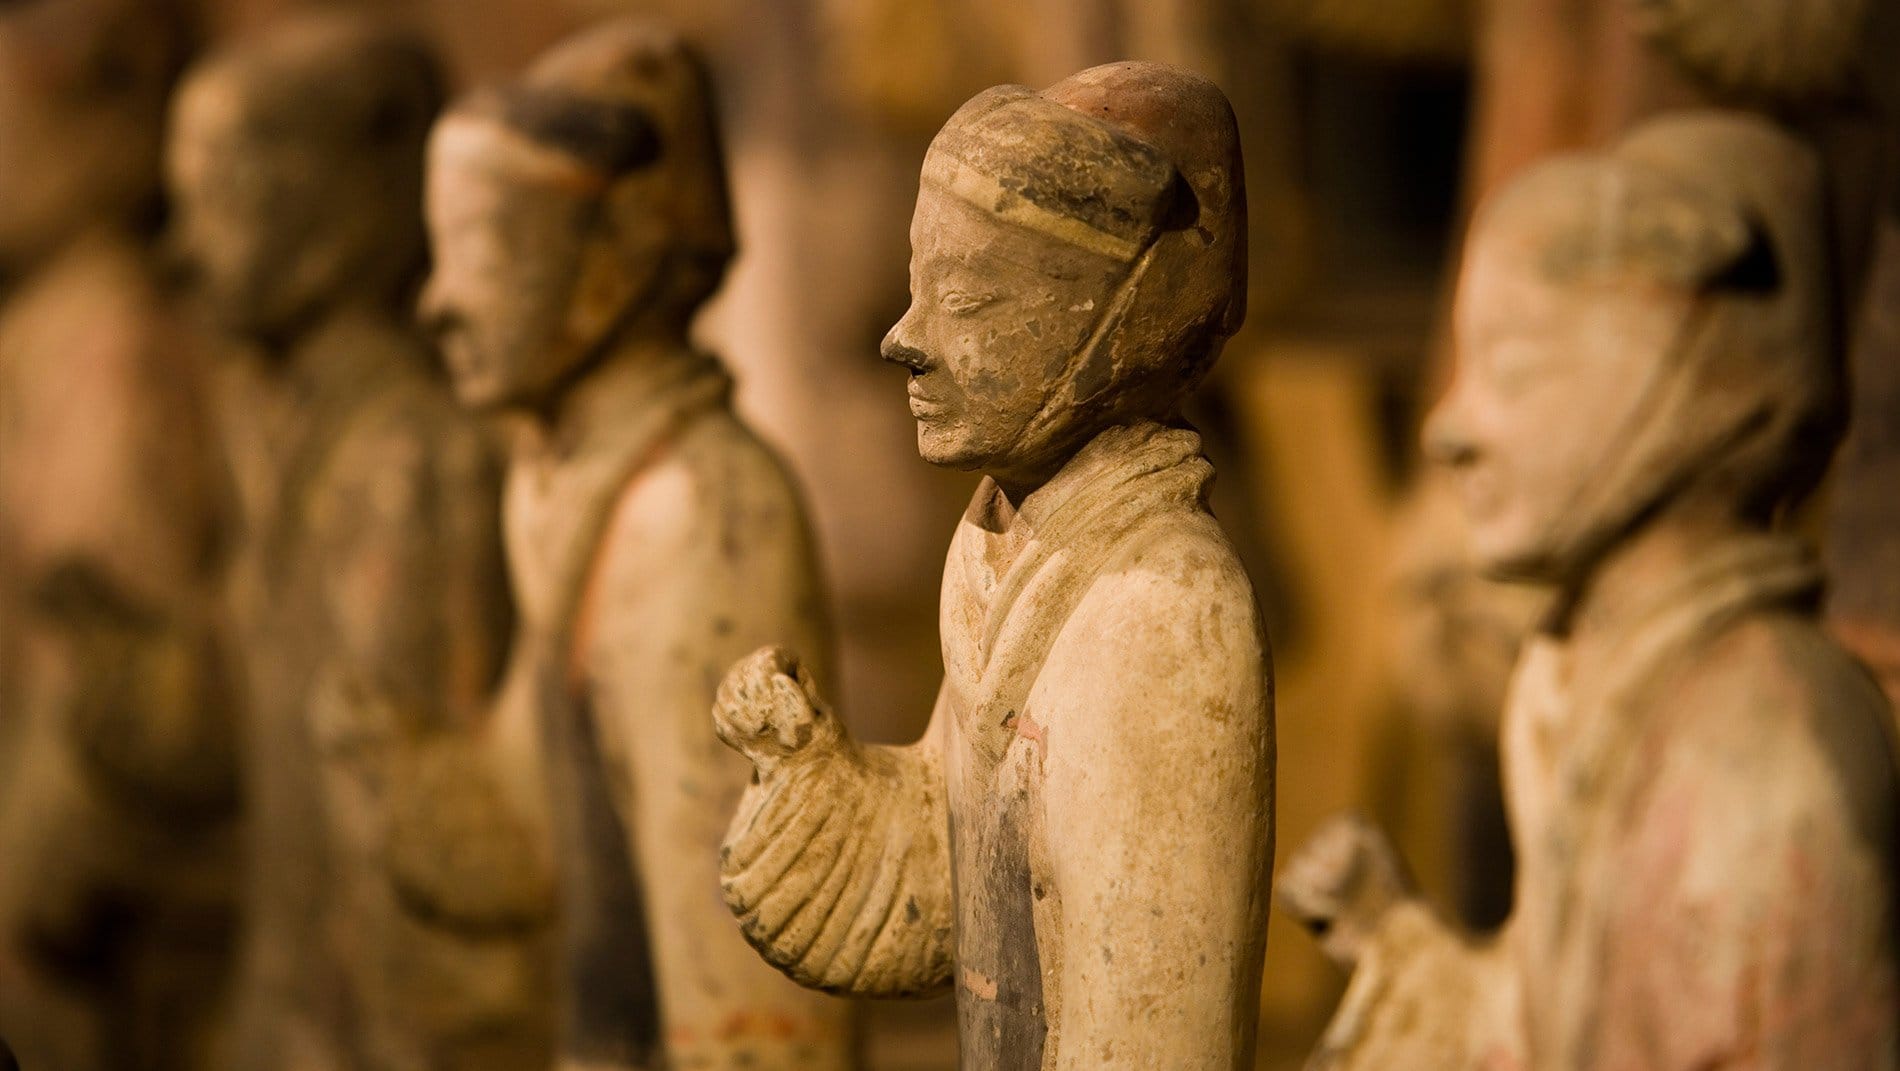 Yangling Museum~Though not as well-known as the Terracotta Warriors site, the Yangling museum of the second century BCE features thousands of stylized burial objects from the mausoleum of the Han dynasty Emperor Jing.